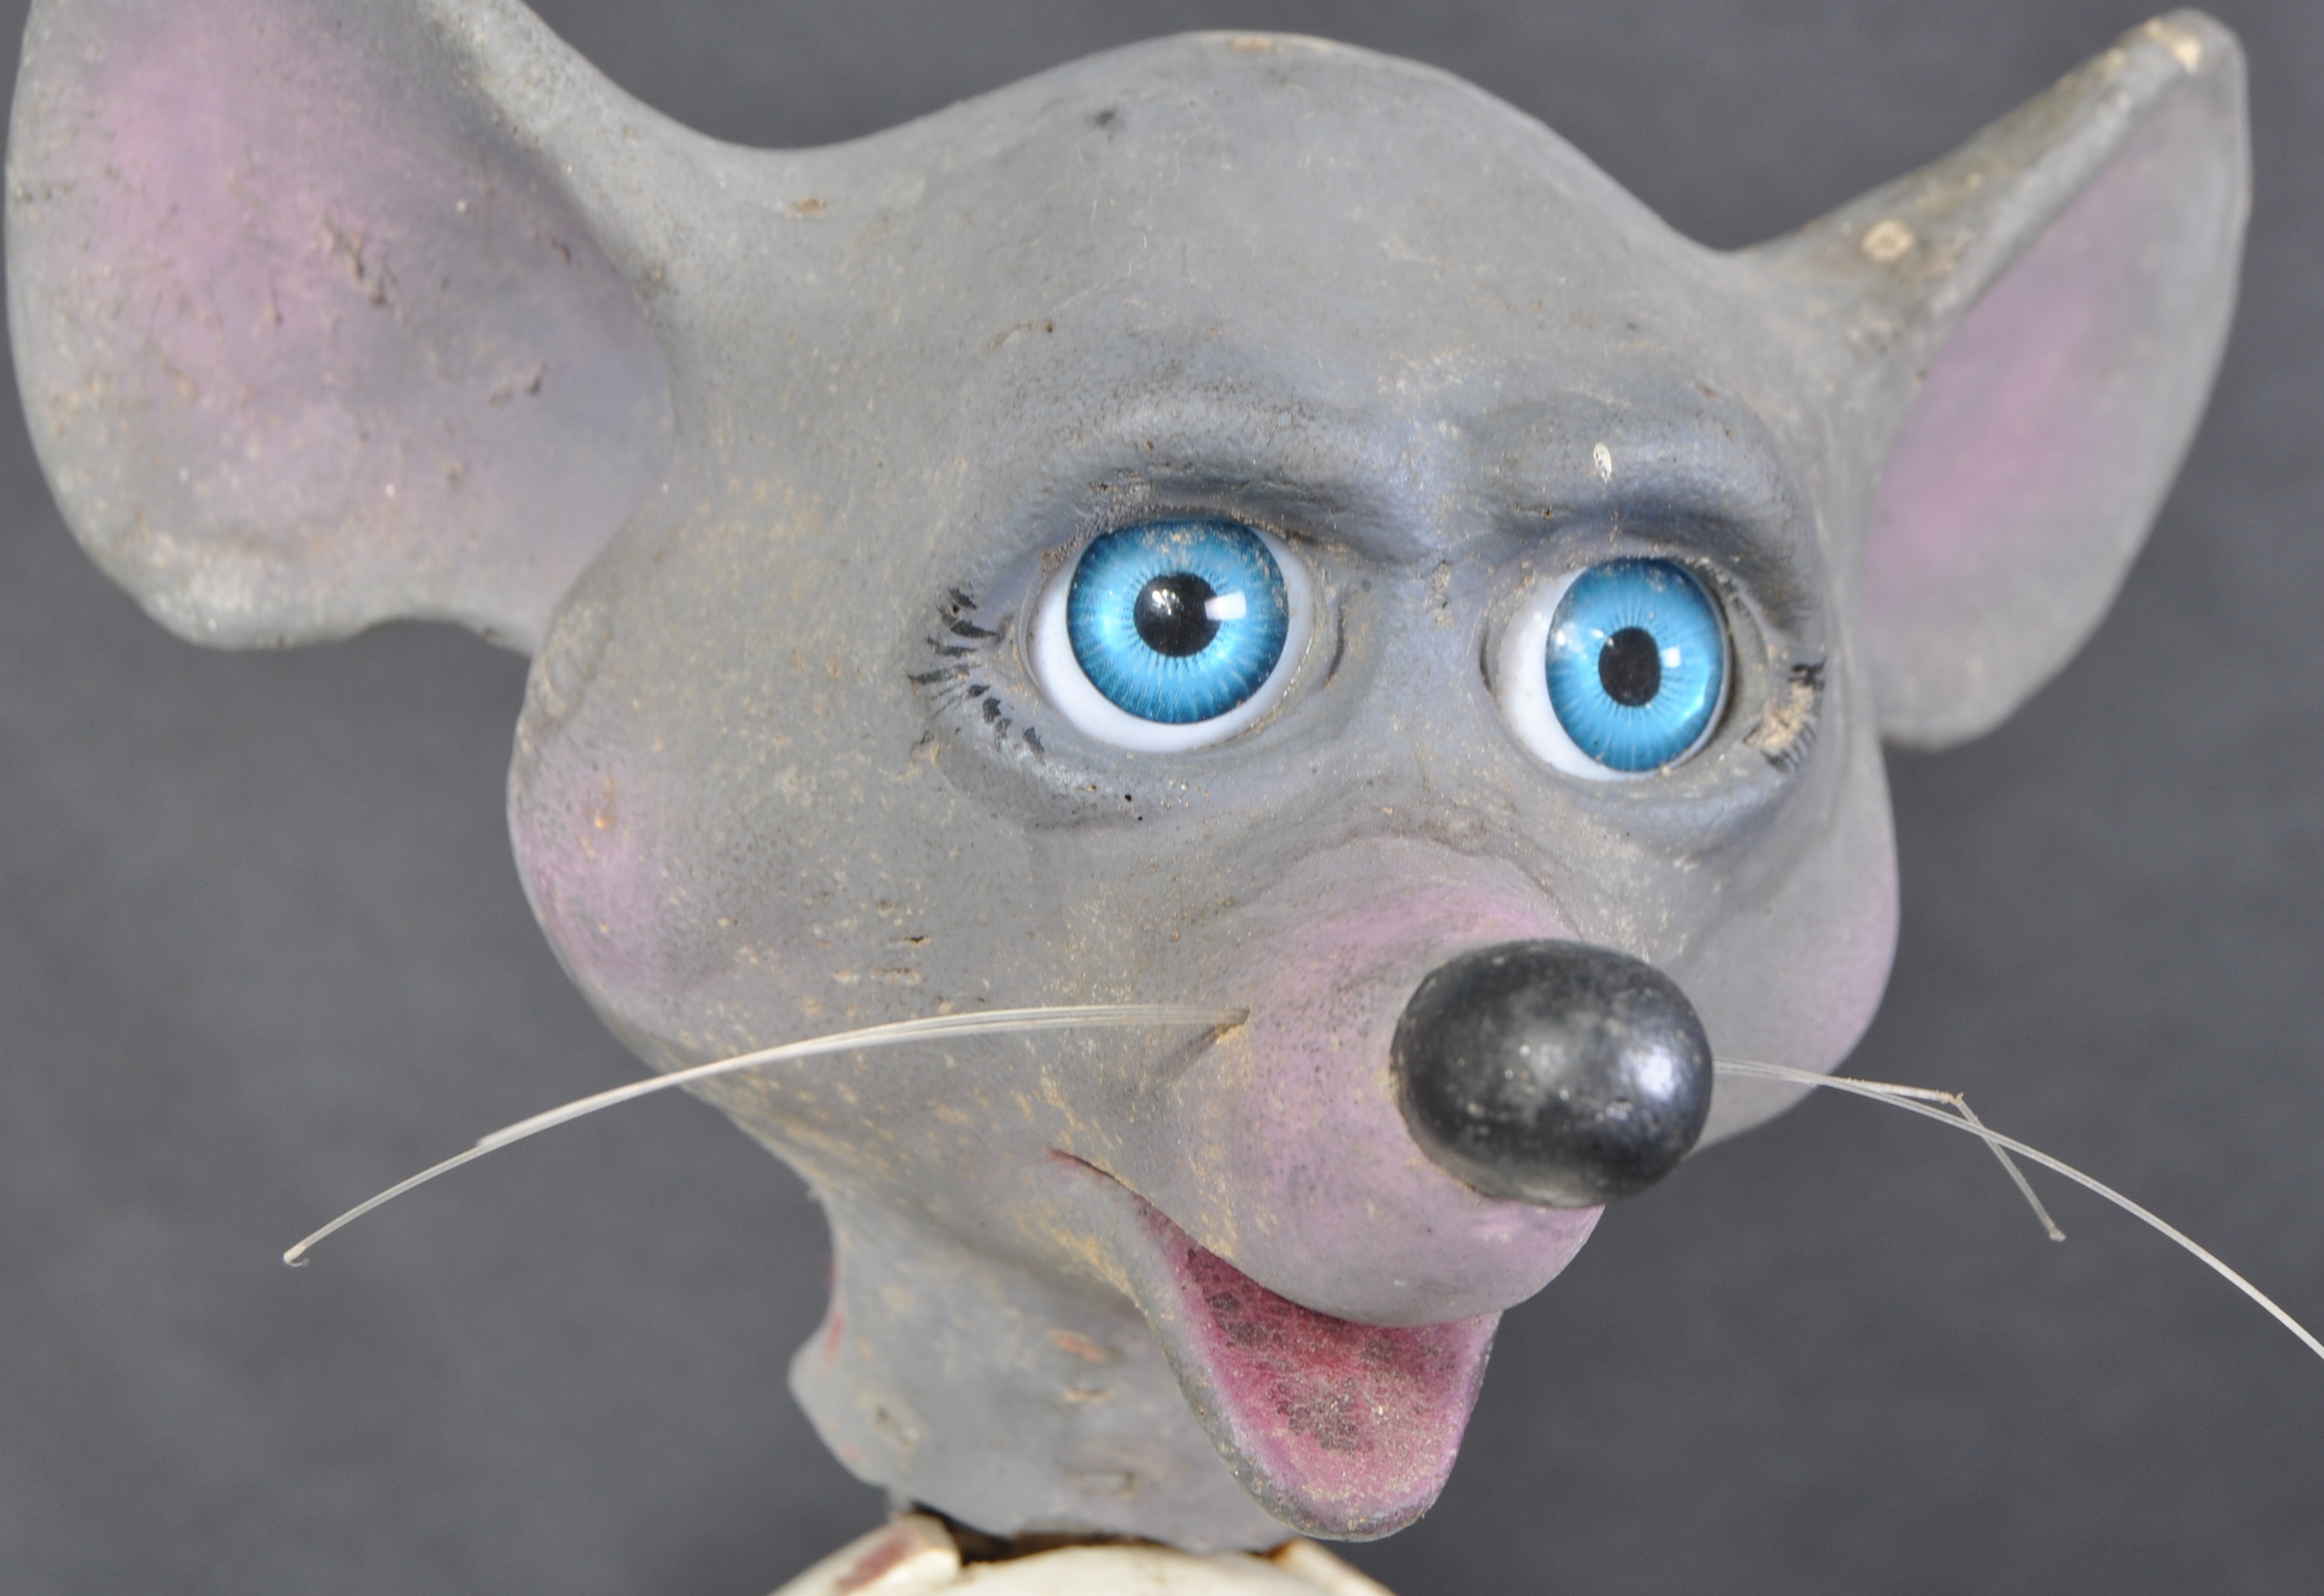 1990s SCRATCH BUILT ANIMATRONIC FIGURE OF A MOUSE - Image 4 of 7